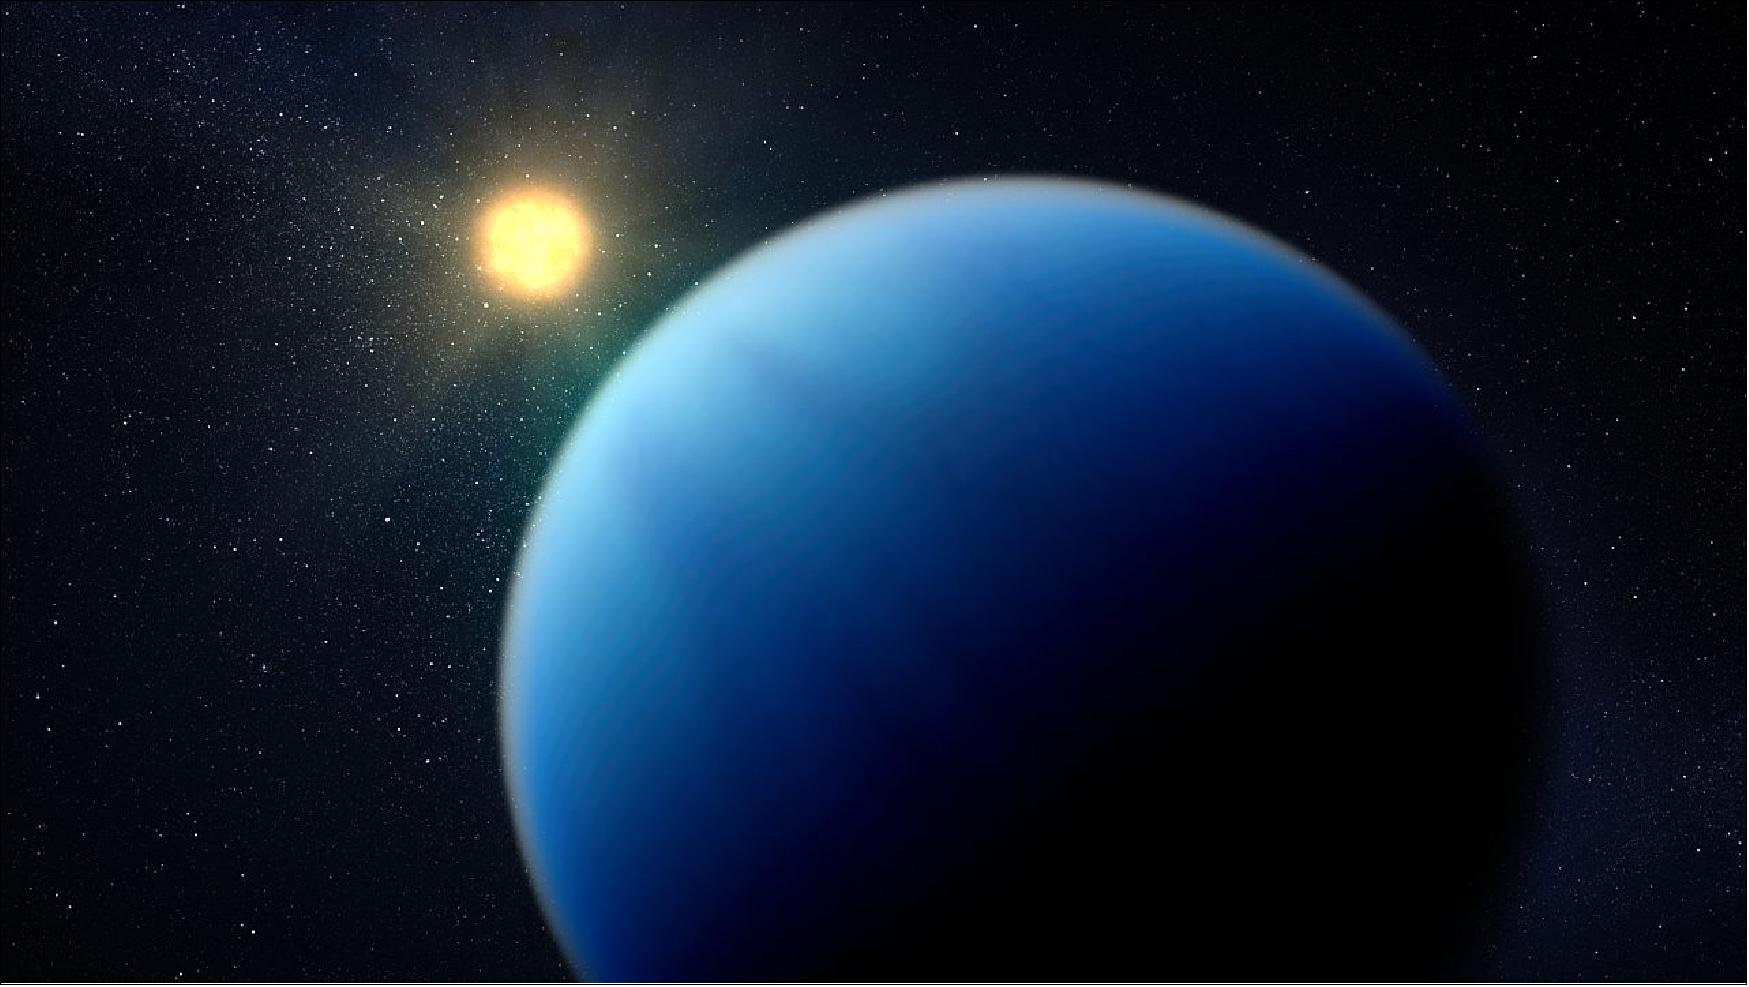 Figure 8: Illustration of what exoplanet TOI-421 b might look like. TOI-421 b is a hot sub-Neptune-sized exoplanet orbiting a Sun-like star roughly 244 light-years from Earth. TOI-421 b is thought to have a clear atmosphere free of haze and clouds. This illustration is based on our knowledge of the planet and its host star, and predictions about the likely properties of the planet’s atmosphere. Spectroscopic data from Webb will help us better understand the composition of the planet’s atmosphere. - TOI-421 b is in between Earth and Neptune in terms of size (radius 2.68 times Earth), mass (7.2 times Earth), and density (2 times water). It orbits its star at a distance of only 0.056 astronomical unit (5.6% of the distance between Earth and the Sun), completing one orbit in 5.2 Earth-days. The star, TOI-421, has a radius 0.87 times that of the Sun, a mass 0.85 times the Sun, and a temperature of 5325 kelvins (~5050º Celsius), slightly cooler than the Sun [image credits: NASA, ESA, CSA, Dani Player (STScI)]